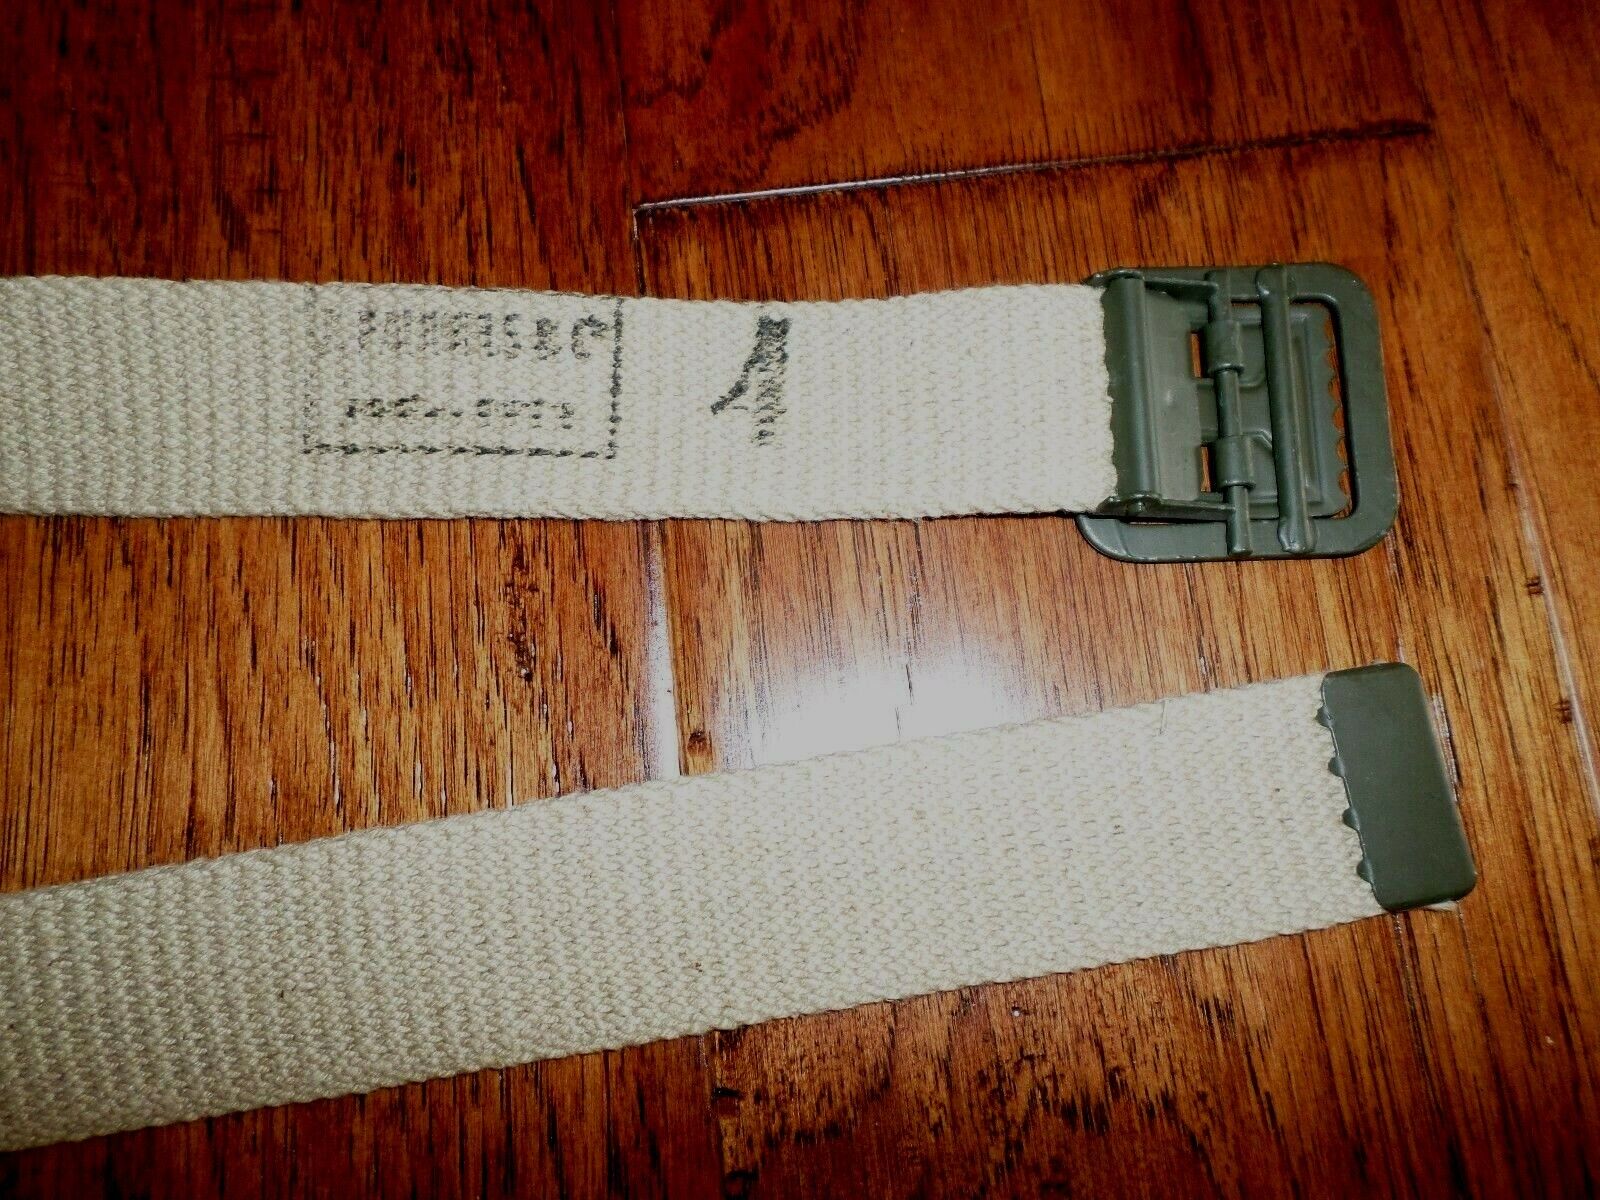 Web Belt, Khaki with solid face brass buckle, WWII US Army Officer